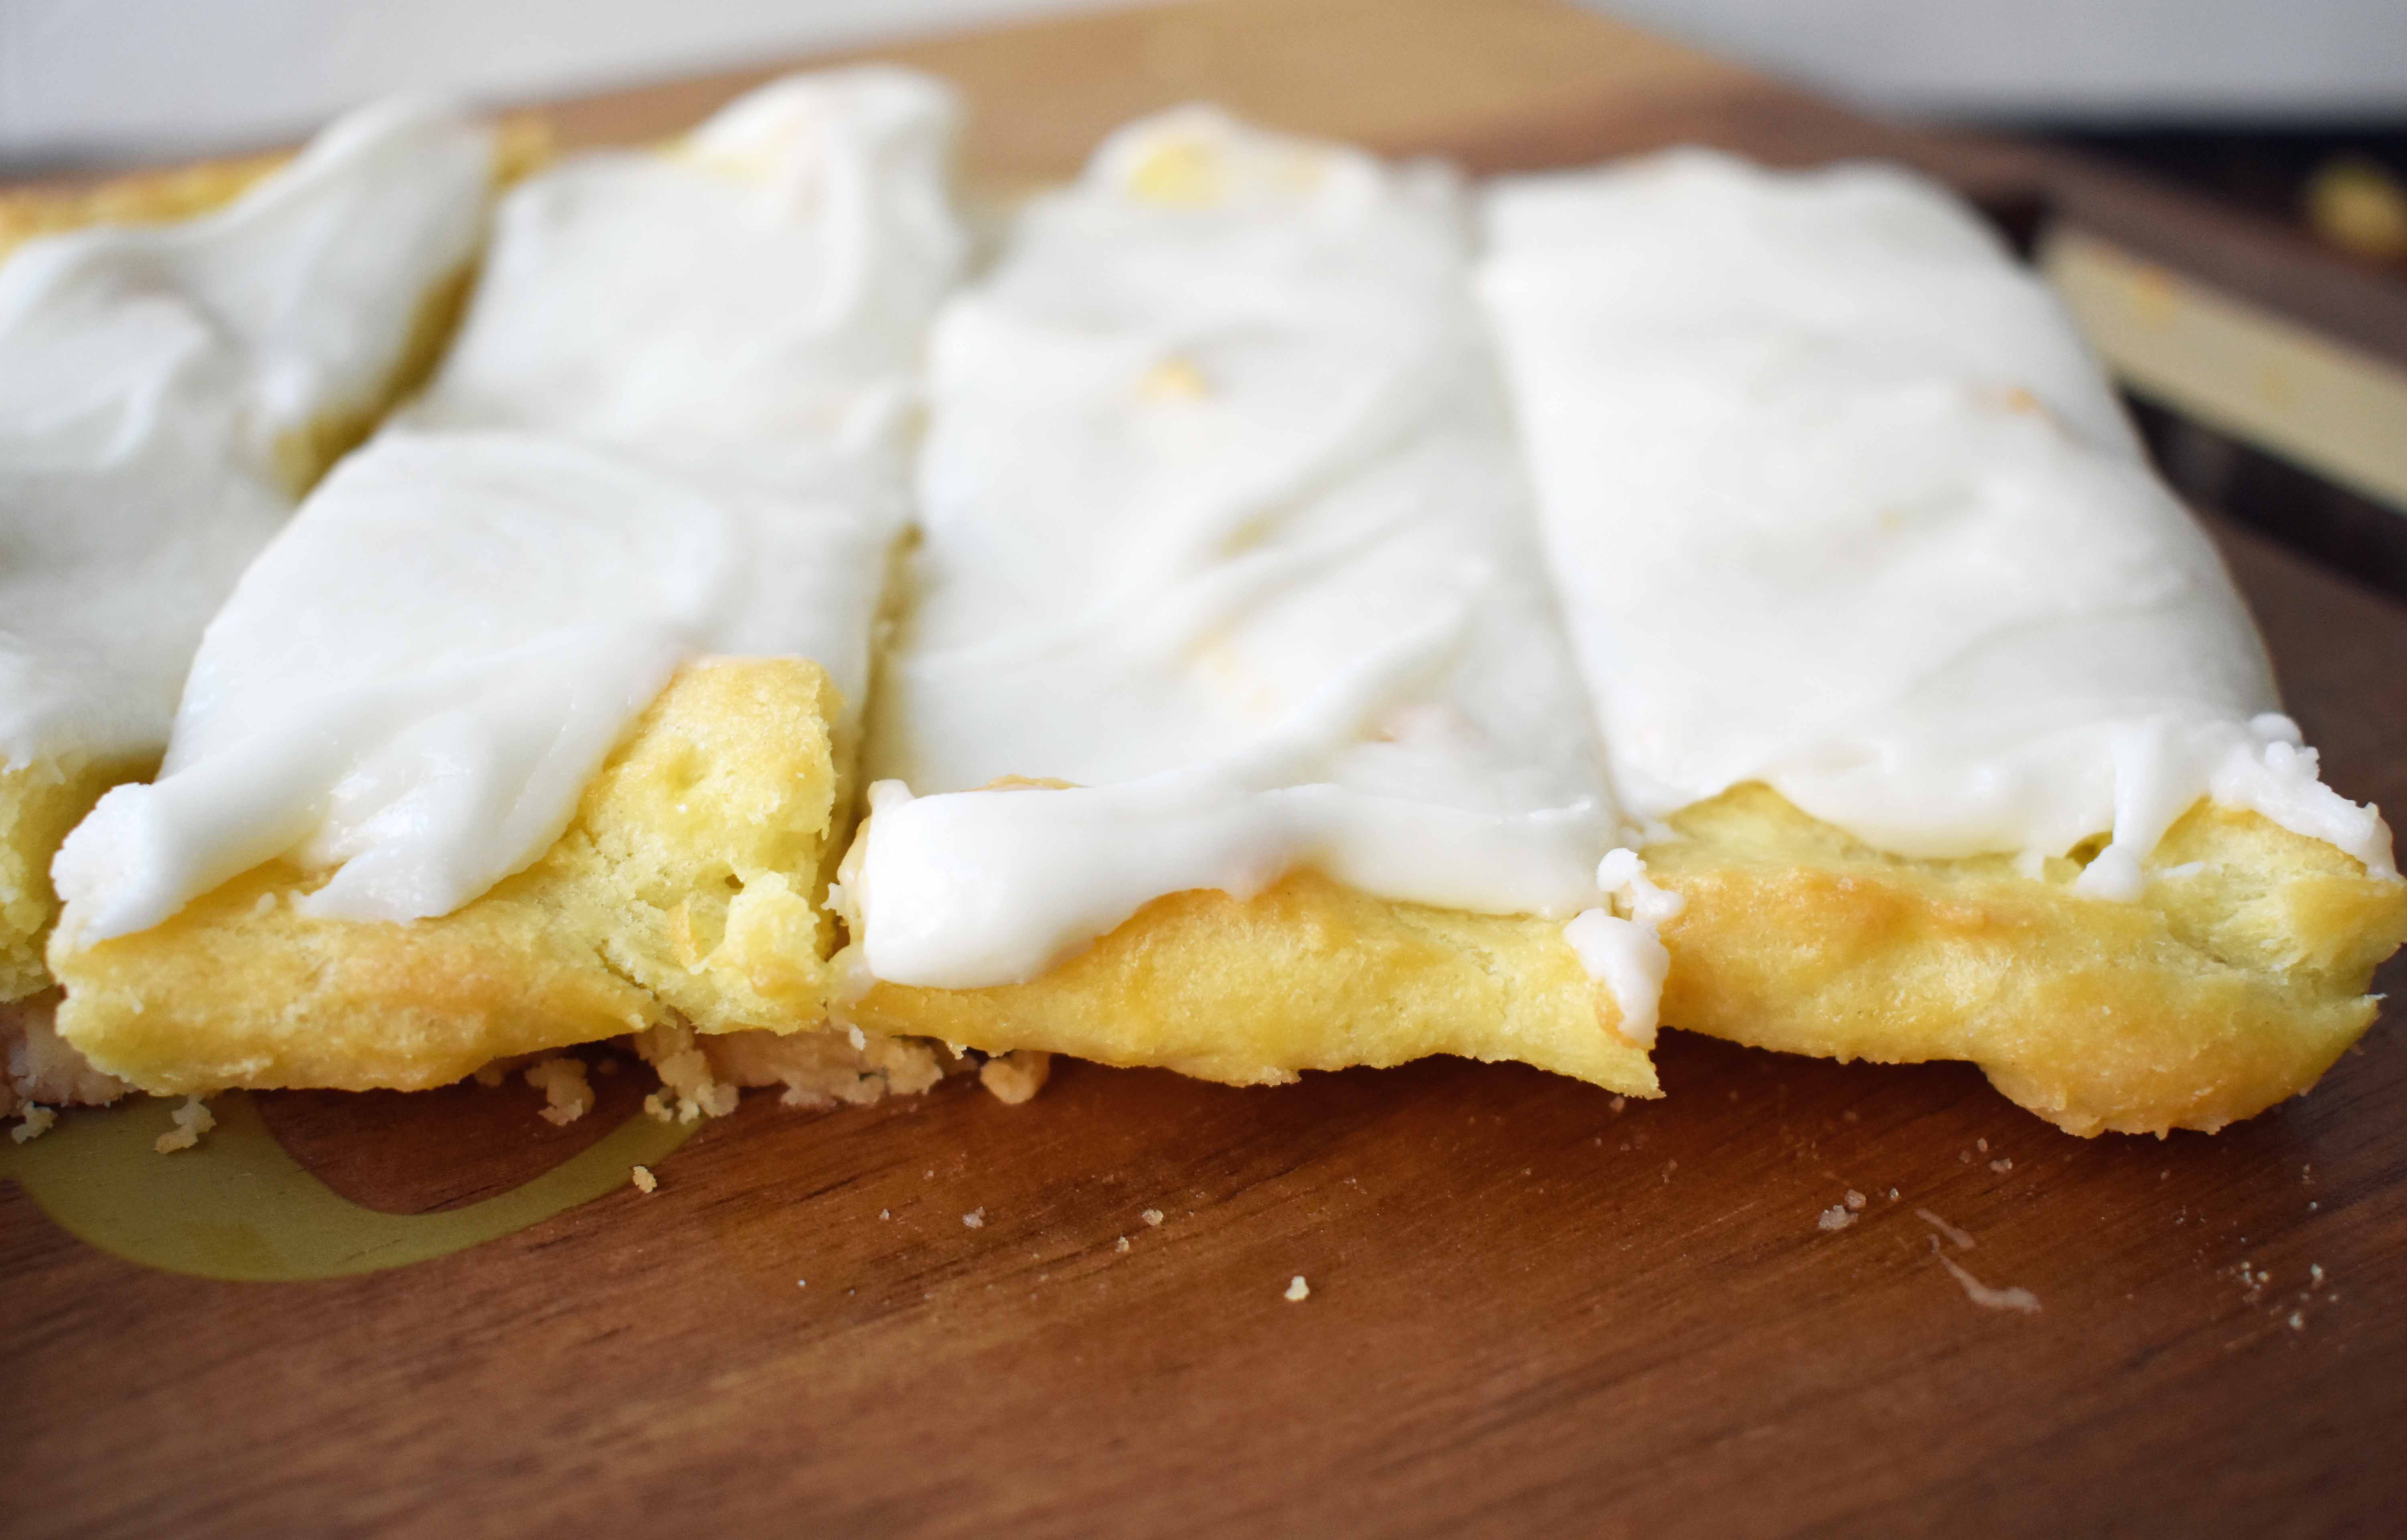 Swedish Pastry by Modern Honey. Buttery flaky layers with almond filling and topped with sweet cream frosting. A popular homemade European pastry. 